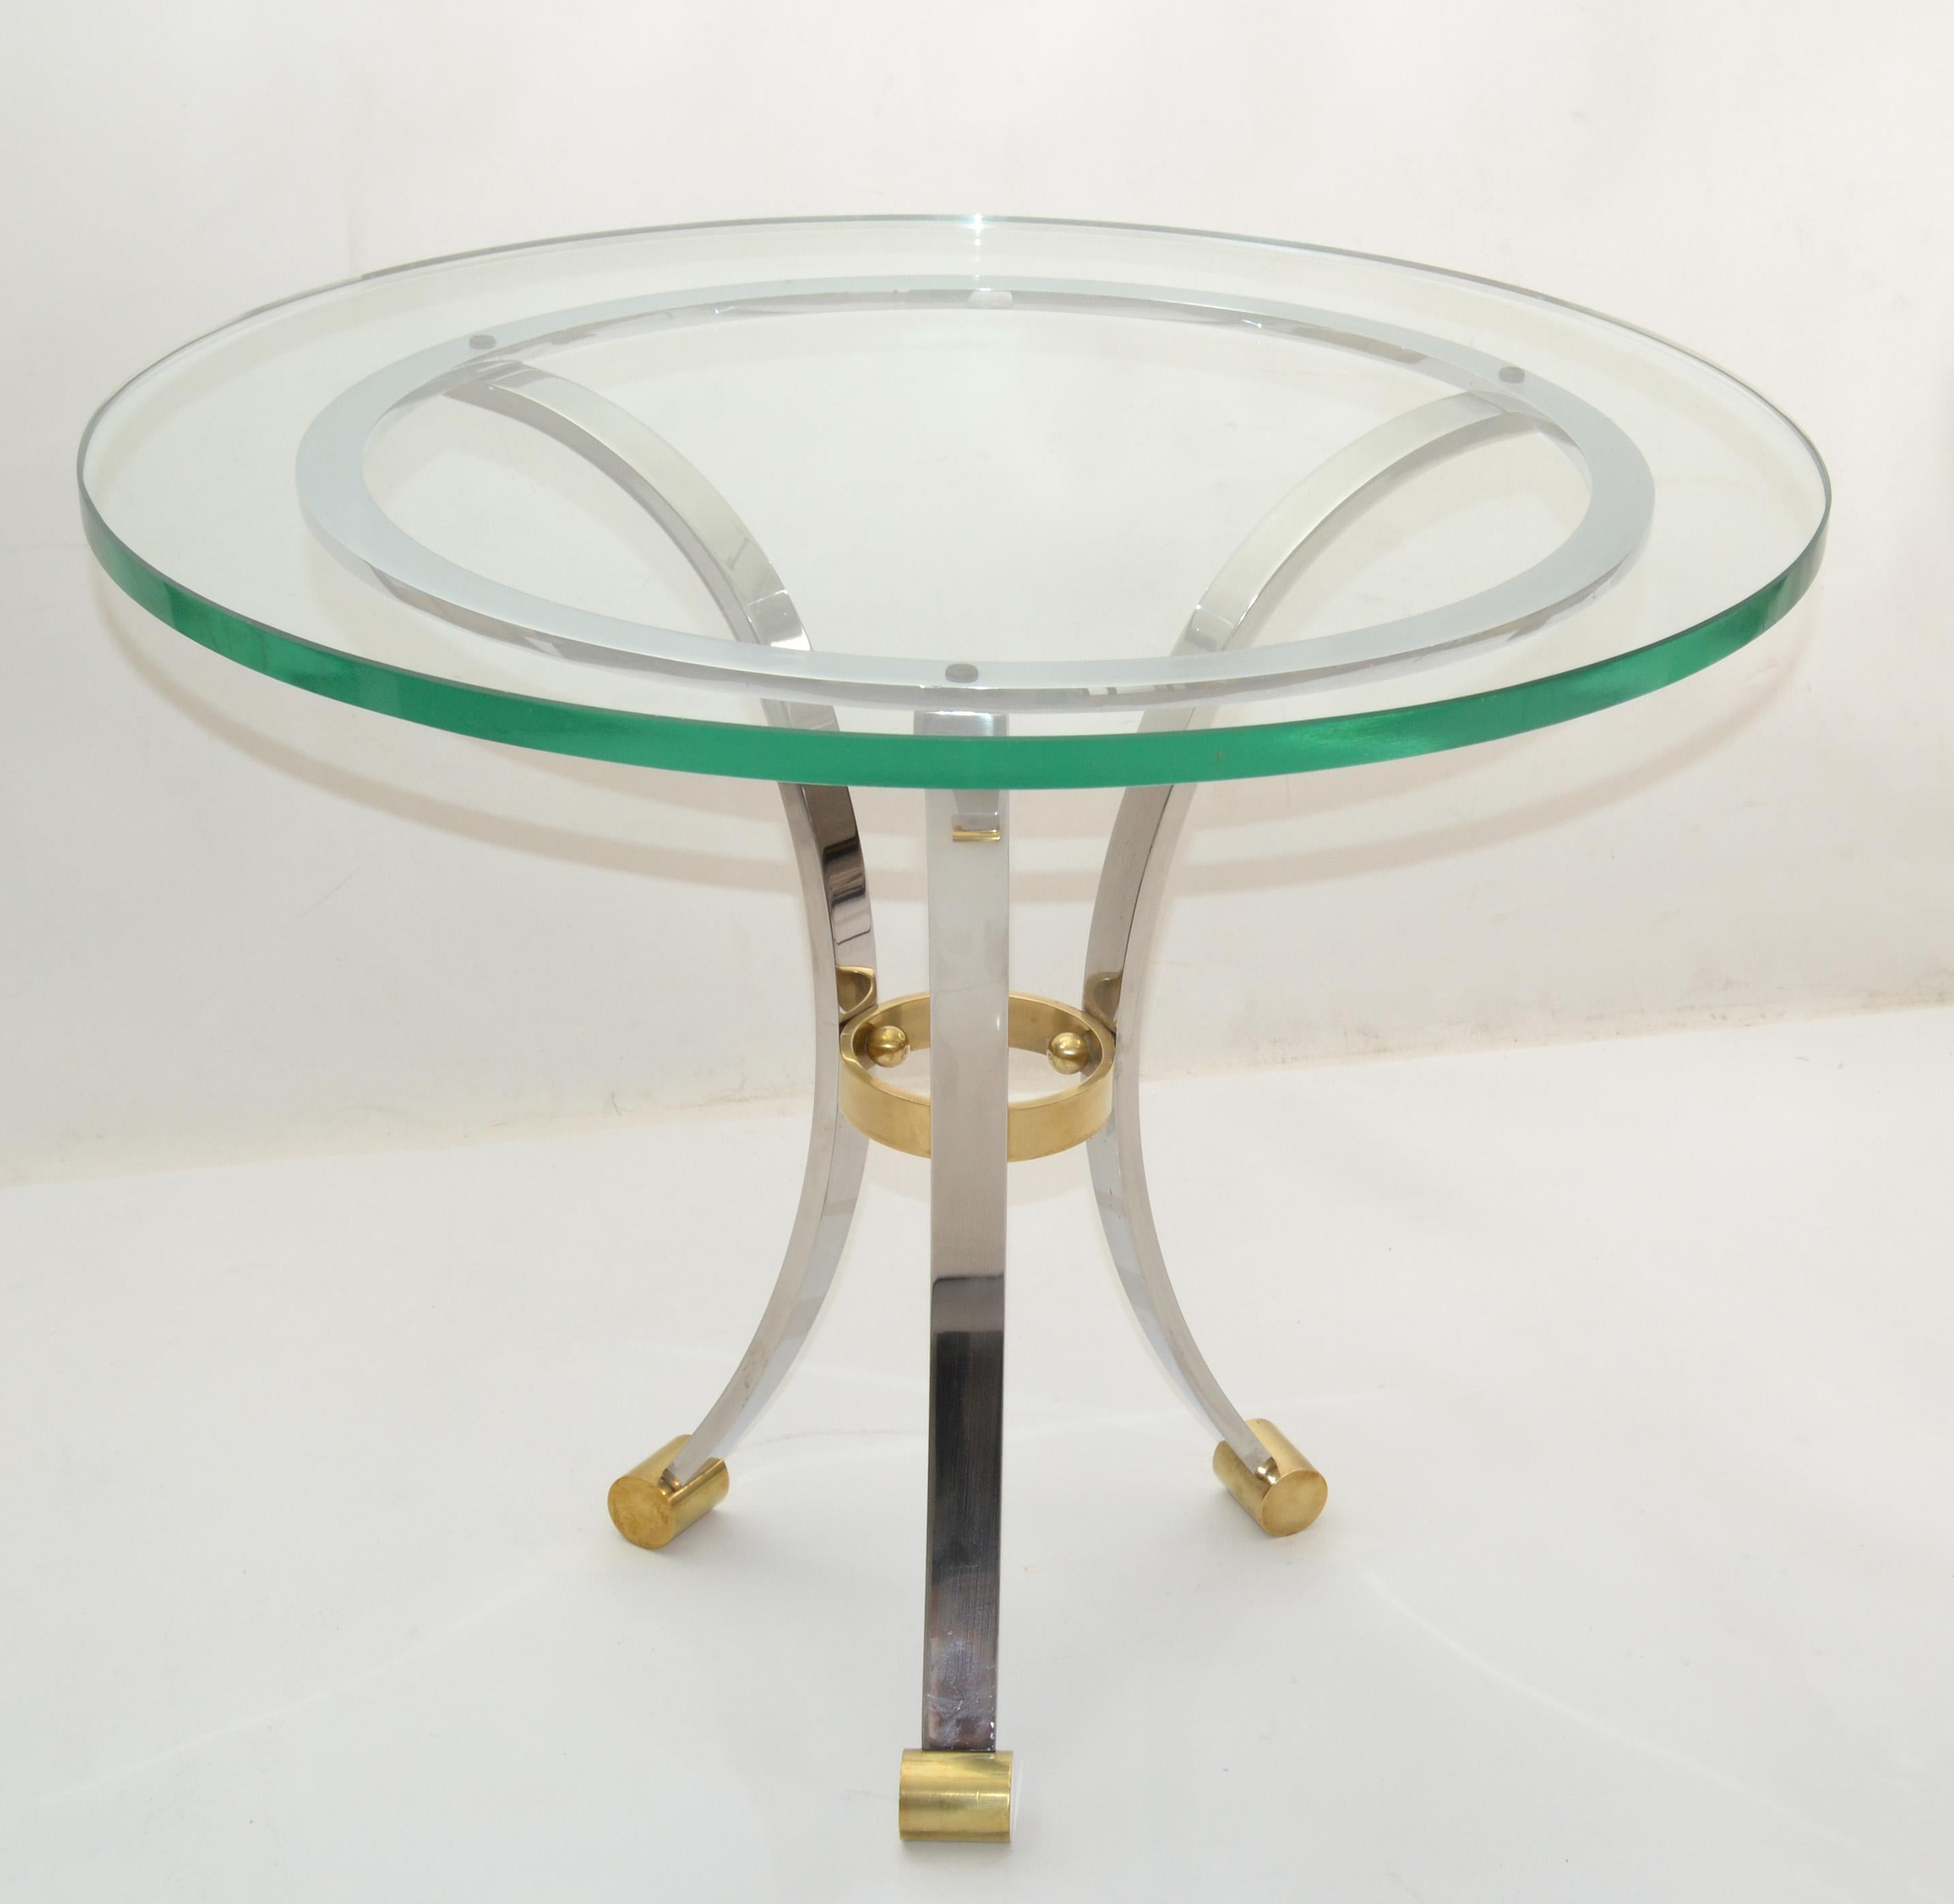 French Maison Jansen Round Glass, Brass & Steel Coffee Table Neoclassical, 1960s For Sale 11